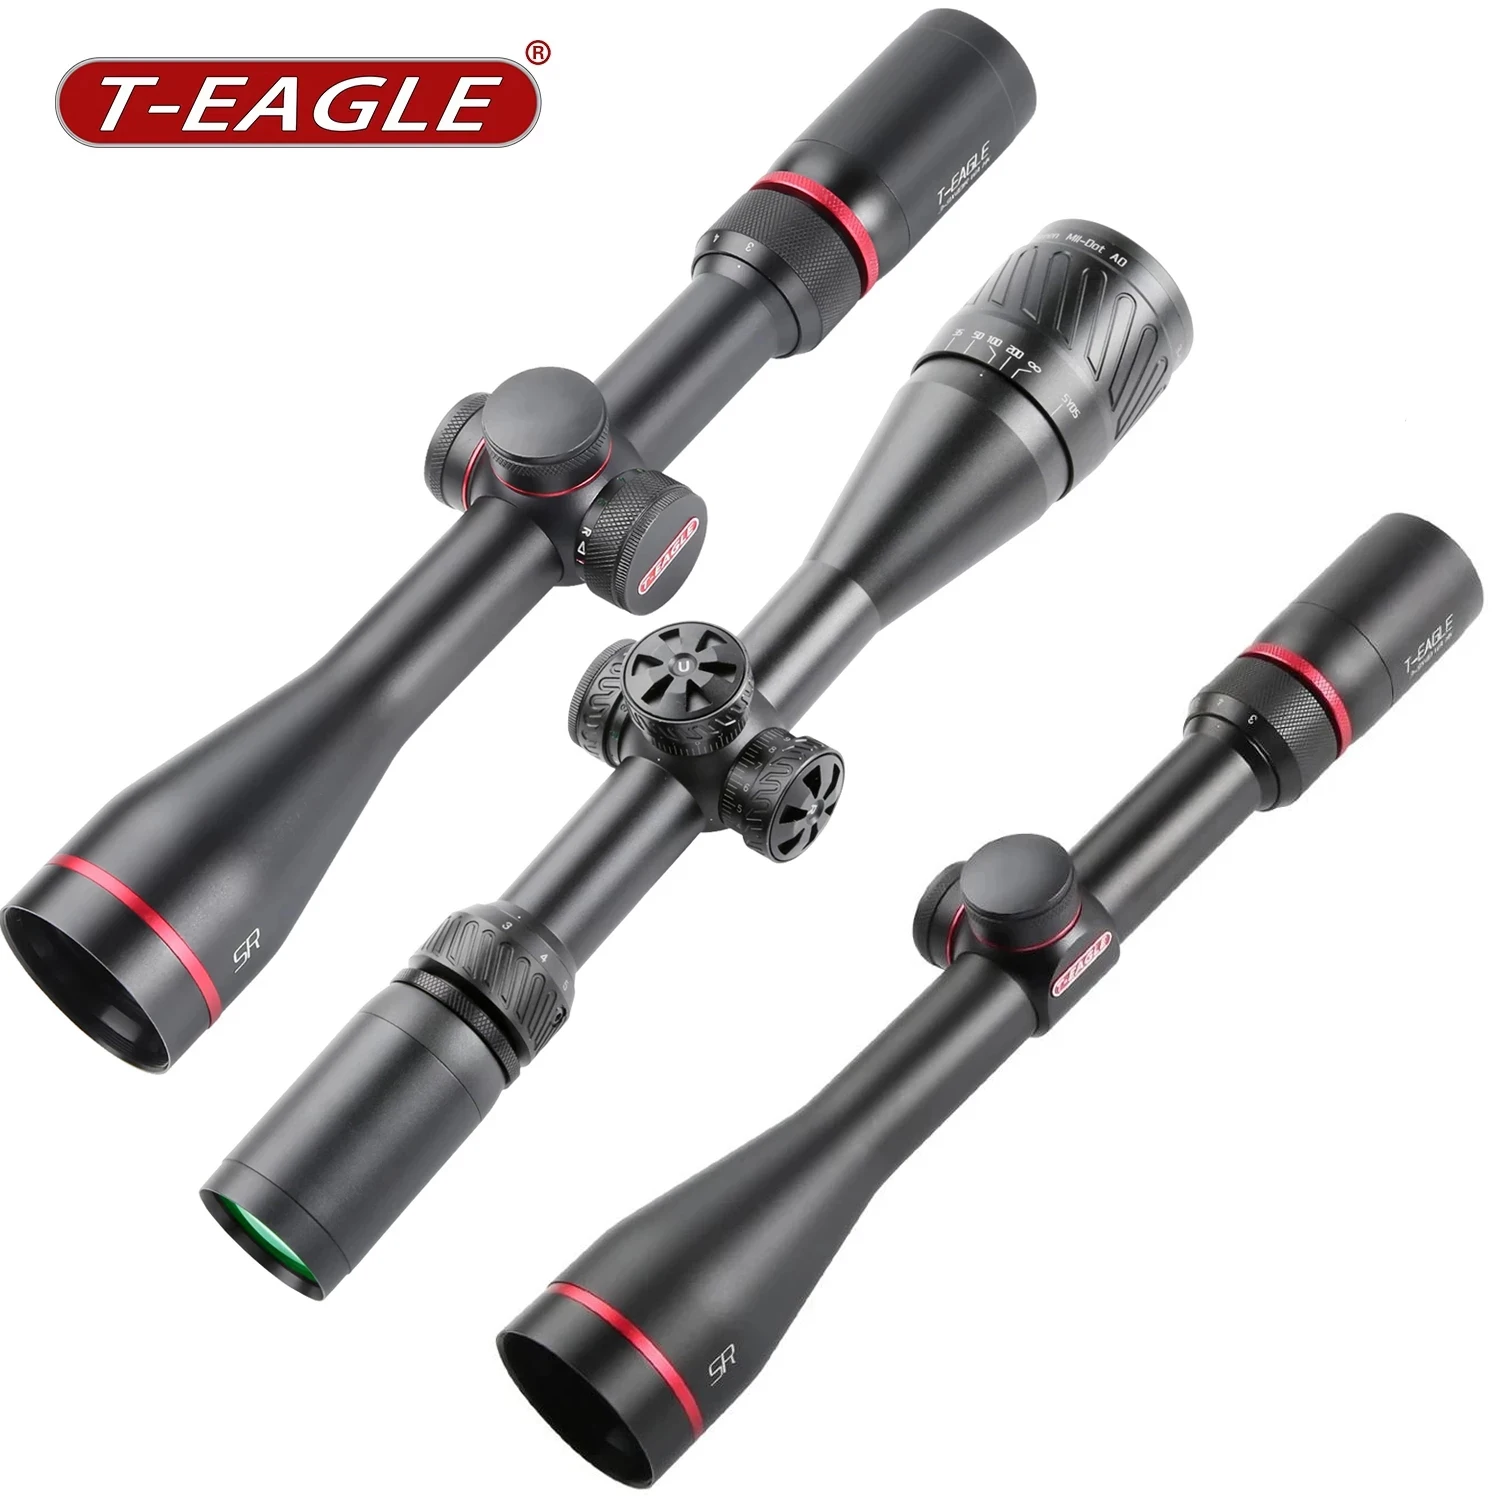 T-EAGLE Series Hunting Rifle Scope Tactical Optical RiflesScope Gun Airsoft Sight  Shock Proof with Cover